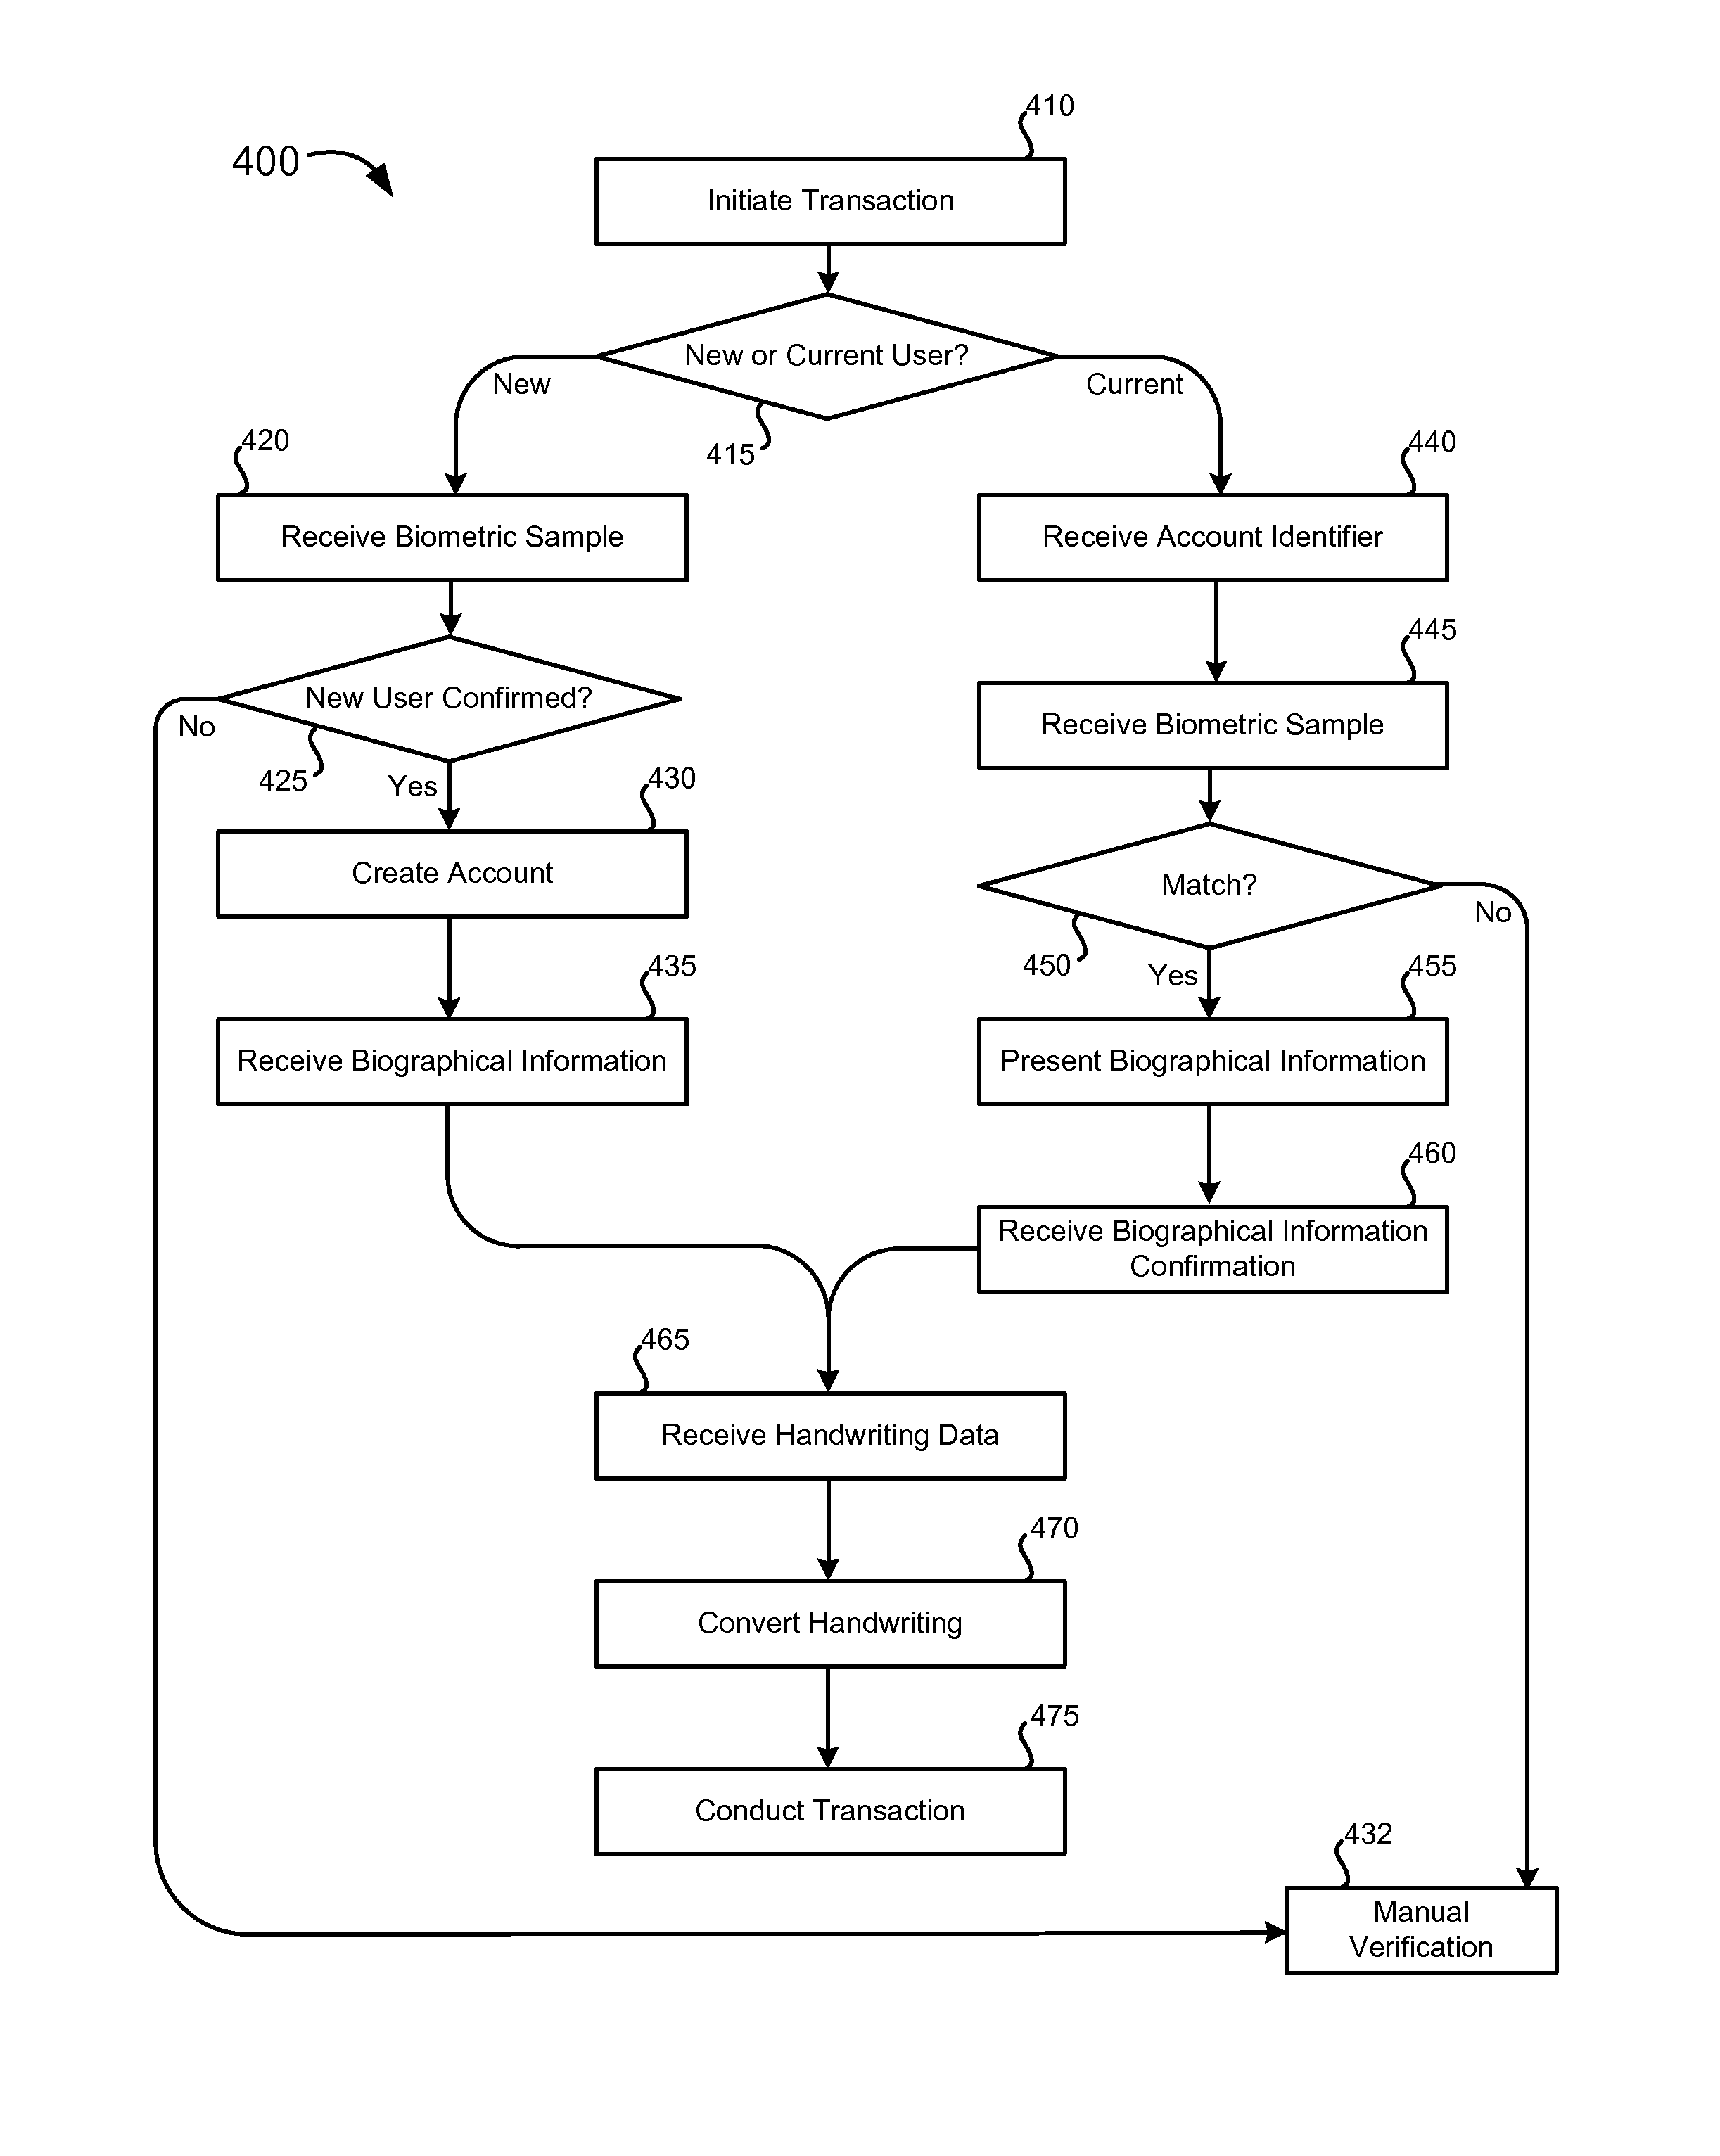 Multi-user device with information capture capabilities